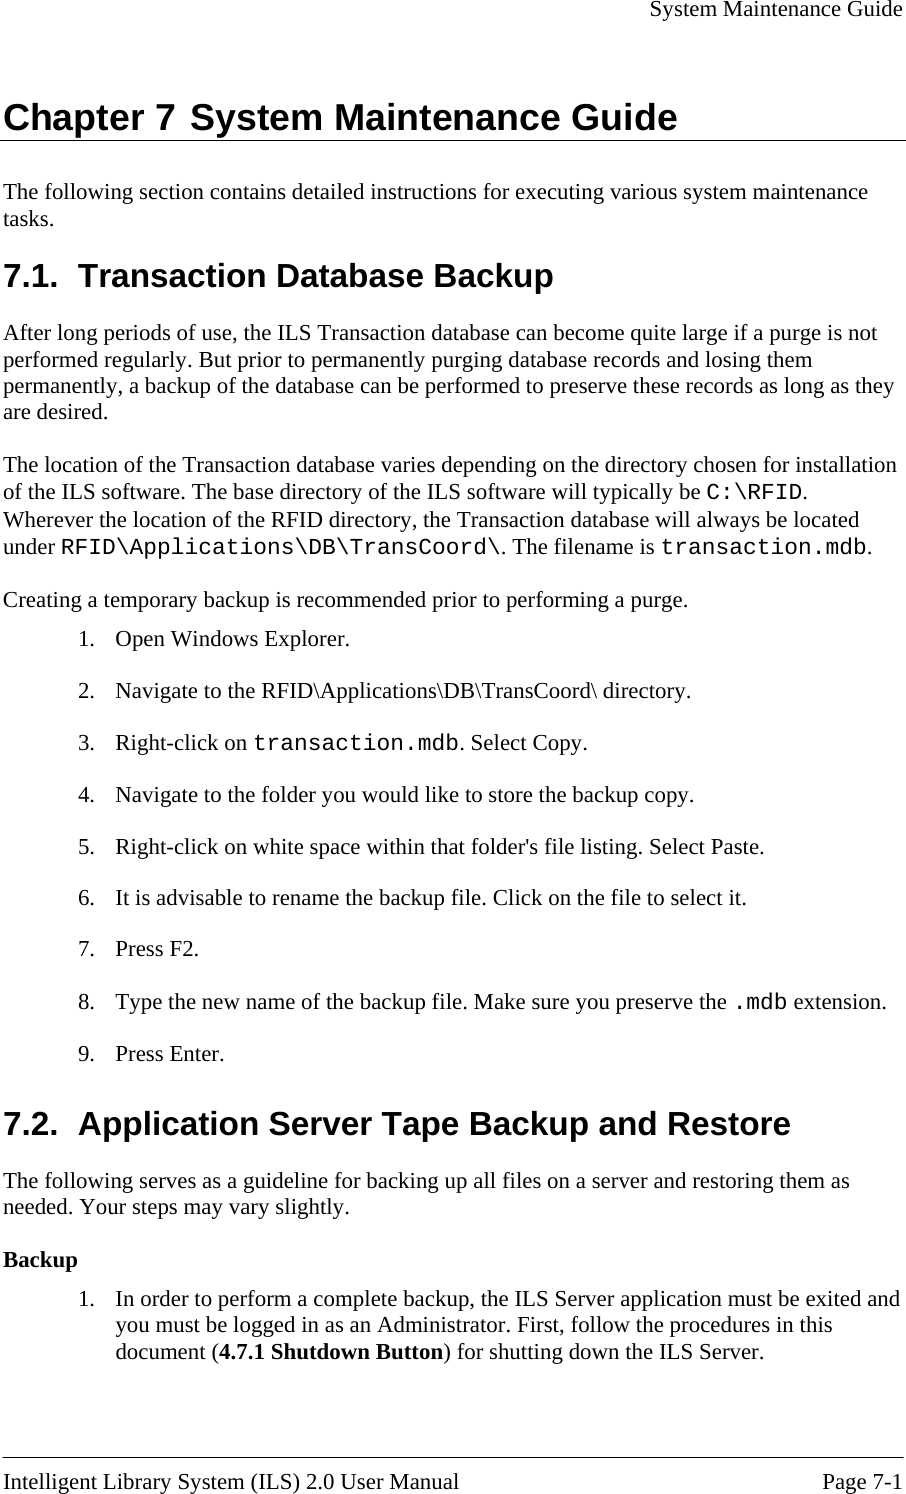     System Maintenance Guide   Intelligent Library System (ILS) 2.0 User Manual  Page 7-1 Chapter 7 System Maintenance Guide The following section contains detailed instructions for executing various system maintenance tasks. 7.1.  Transaction Database Backup After long periods of use, the ILS Transaction database can become quite large if a purge is not performed regularly. But prior to permanently purging database records and losing them permanently, a backup of the database can be performed to preserve these records as long as they are desired.  The location of the Transaction database varies depending on the directory chosen for installation of the ILS software. The base directory of the ILS software will typically be C:\RFID. Wherever the location of the RFID directory, the Transaction database will always be located under RFID\Applications\DB\TransCoord\. The filename is transaction.mdb.  Creating a temporary backup is recommended prior to performing a purge.  1.  Open Windows Explorer. 2.  Navigate to the RFID\Applications\DB\TransCoord\ directory. 3. Right-click on transaction.mdb. Select Copy. 4.  Navigate to the folder you would like to store the backup copy. 5.  Right-click on white space within that folder&apos;s file listing. Select Paste. 6.  It is advisable to rename the backup file. Click on the file to select it. 7. Press F2. 8.  Type the new name of the backup file. Make sure you preserve the .mdb extension. 9. Press Enter. 7.2.  Application Server Tape Backup and Restore The following serves as a guideline for backing up all files on a server and restoring them as needed. Your steps may vary slightly.  Backup 1.  In order to perform a complete backup, the ILS Server application must be exited and you must be logged in as an Administrator. First, follow the procedures in this document (4.7.1 Shutdown Button) for shutting down the ILS Server. 